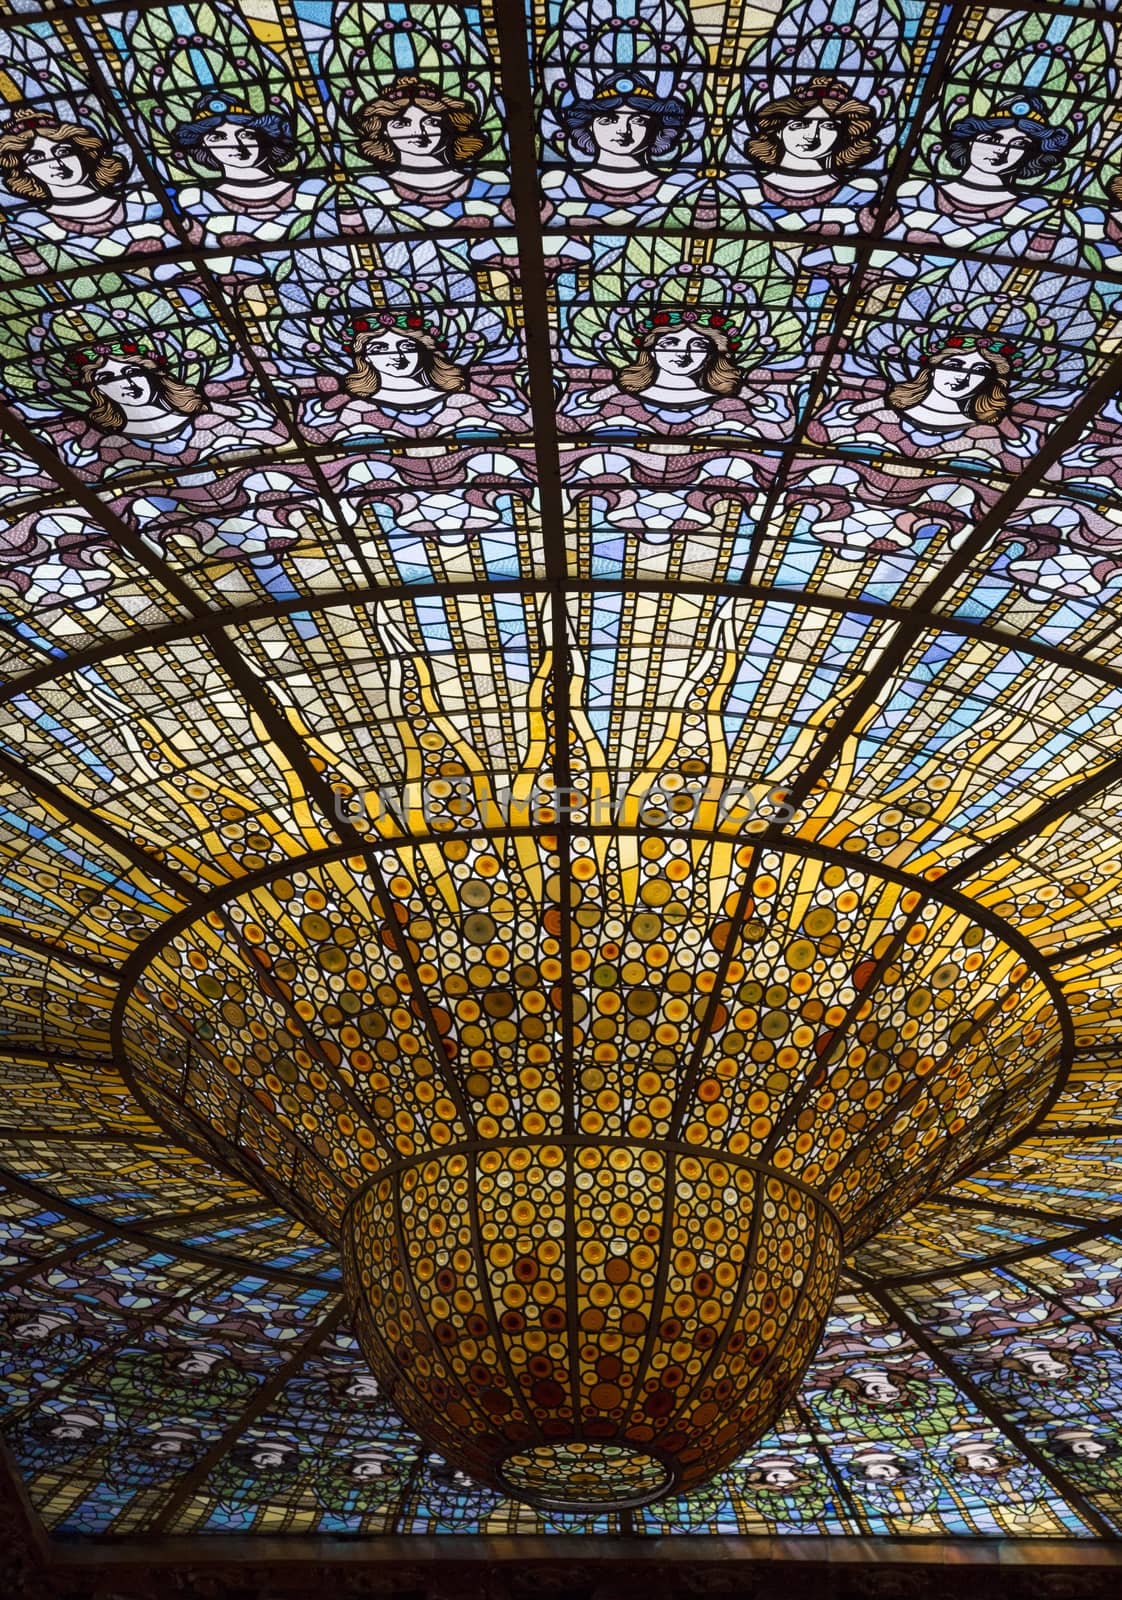 Barcelona, Spain - September 22, 2015: Glass stained dome, Palau de la Musica Catalana was built in 1908 for the Orfeo Catala choral society, a focus of Catalan nationalism.